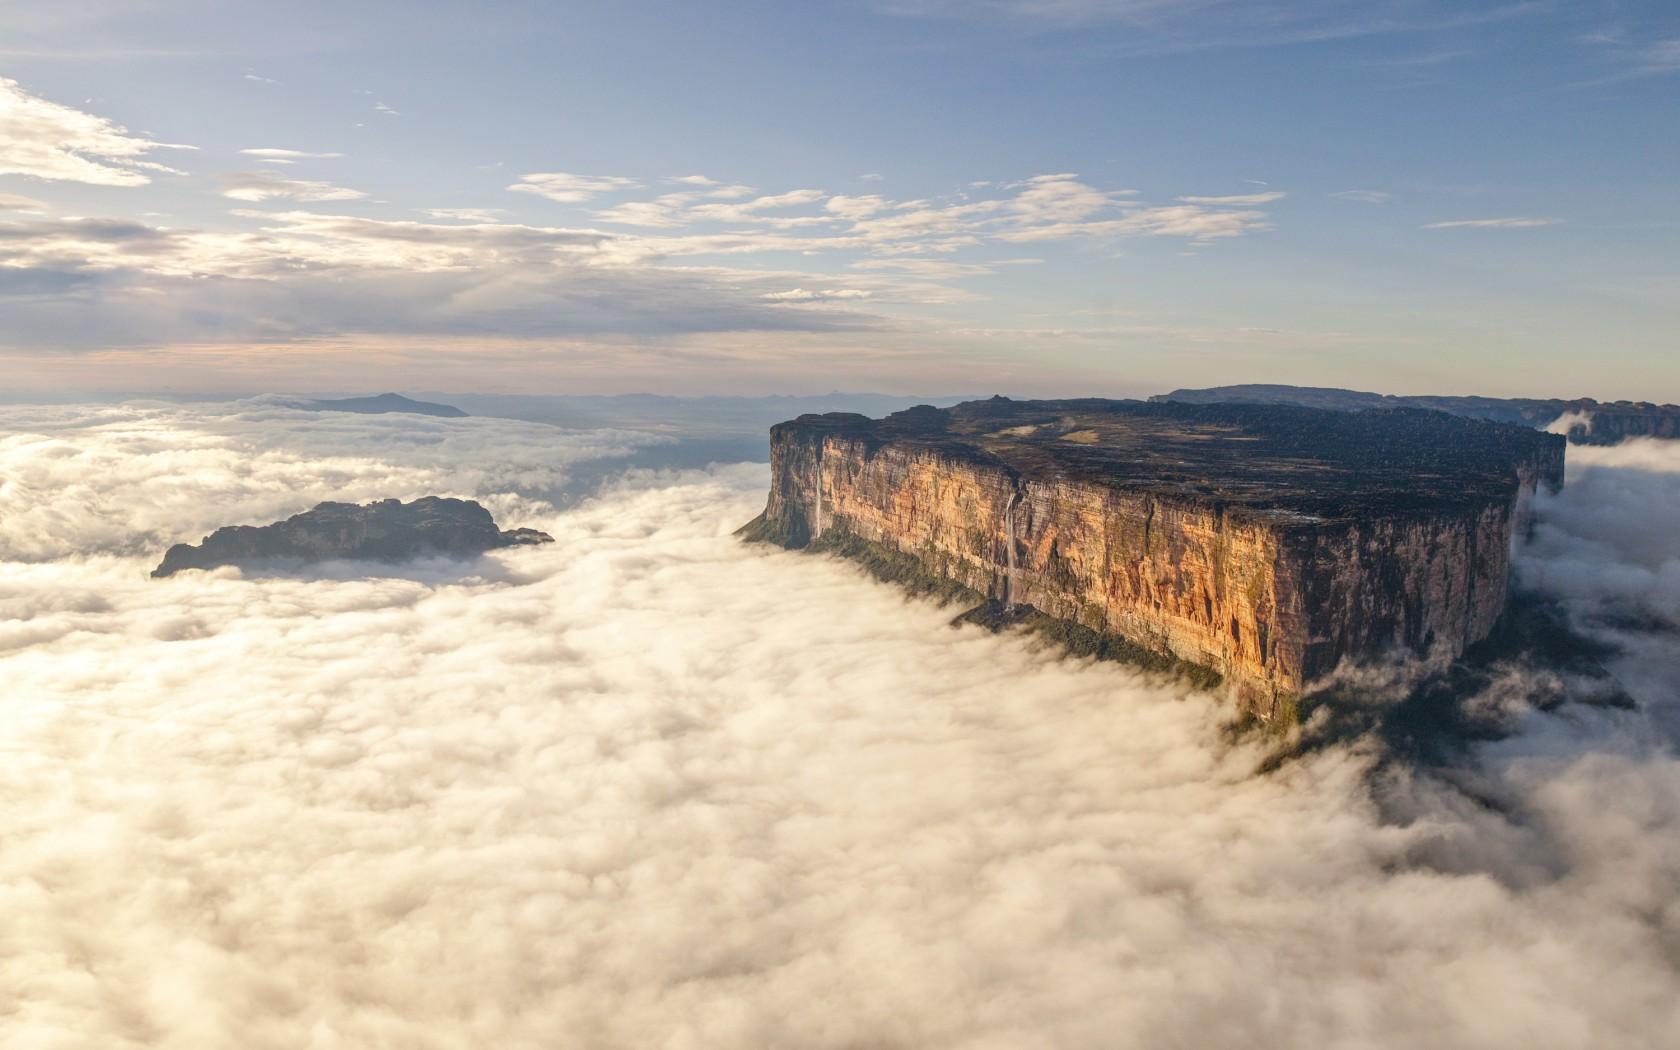 Mount Roraima ! The Oldest Geological Formations on Earth